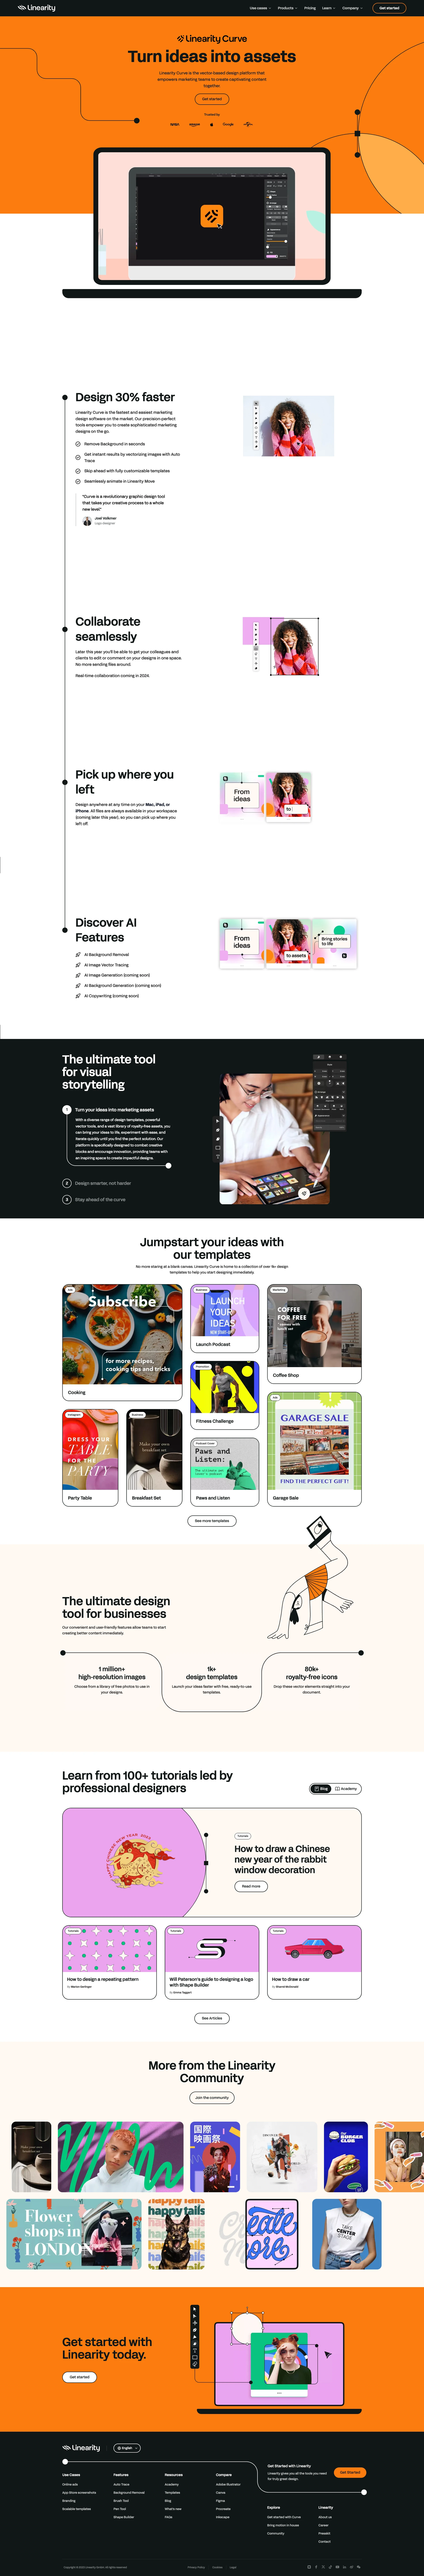 Linearity Landing Page Example: Design and animation tools that boost your marketing efforts. Create stunning visuals with Move and Curve, and drive real results today!